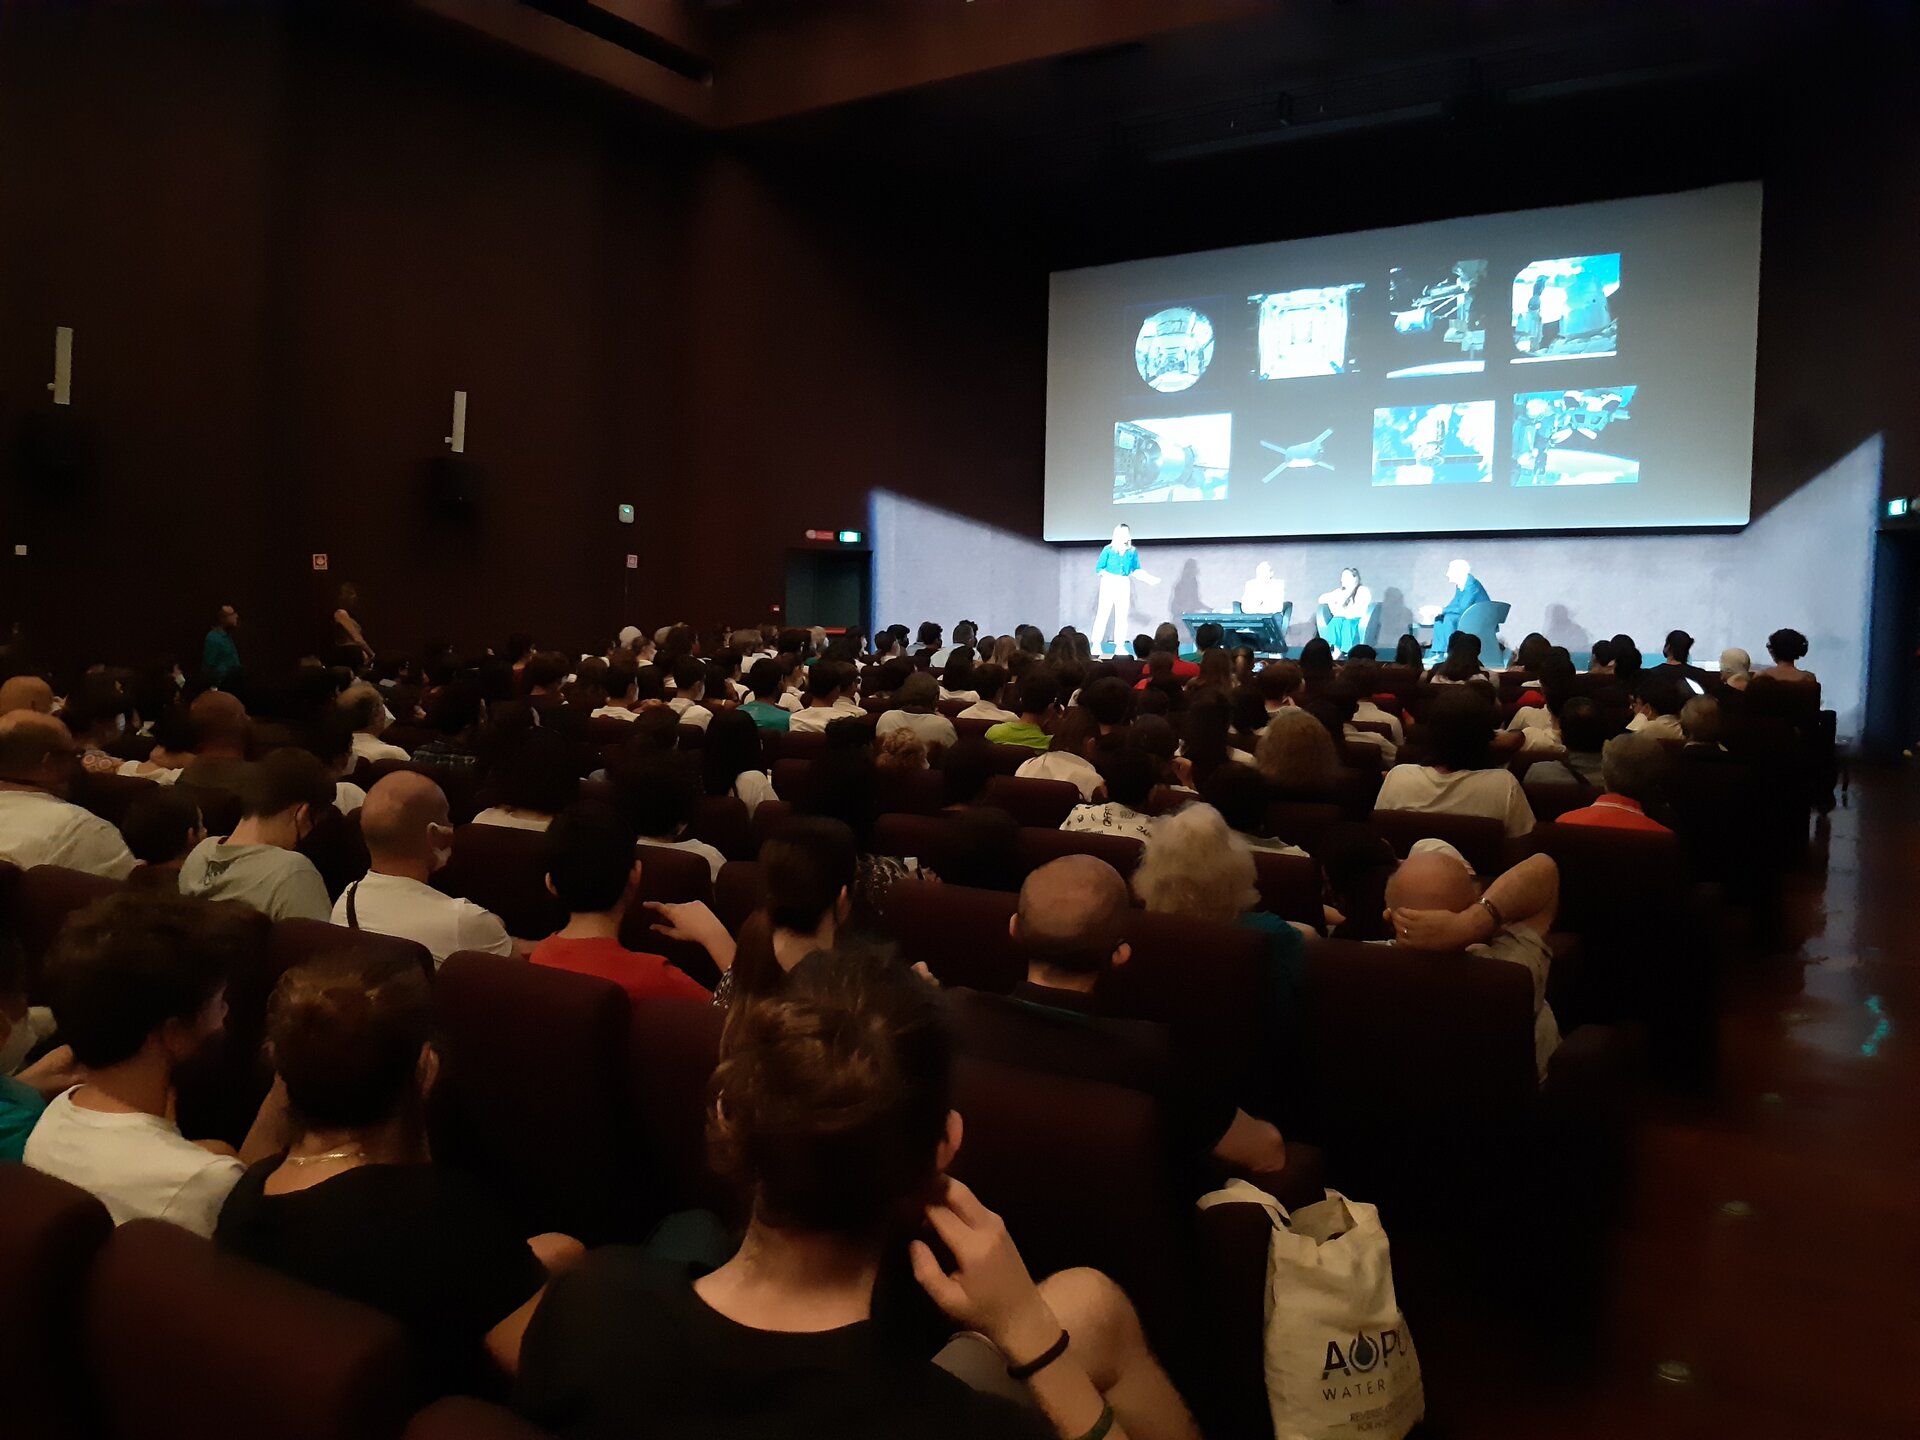 Space experts inspiring students and teachers participating in the special event at the National Museum of Science and Technology Leonardo da Vinci in Milan, Italy.